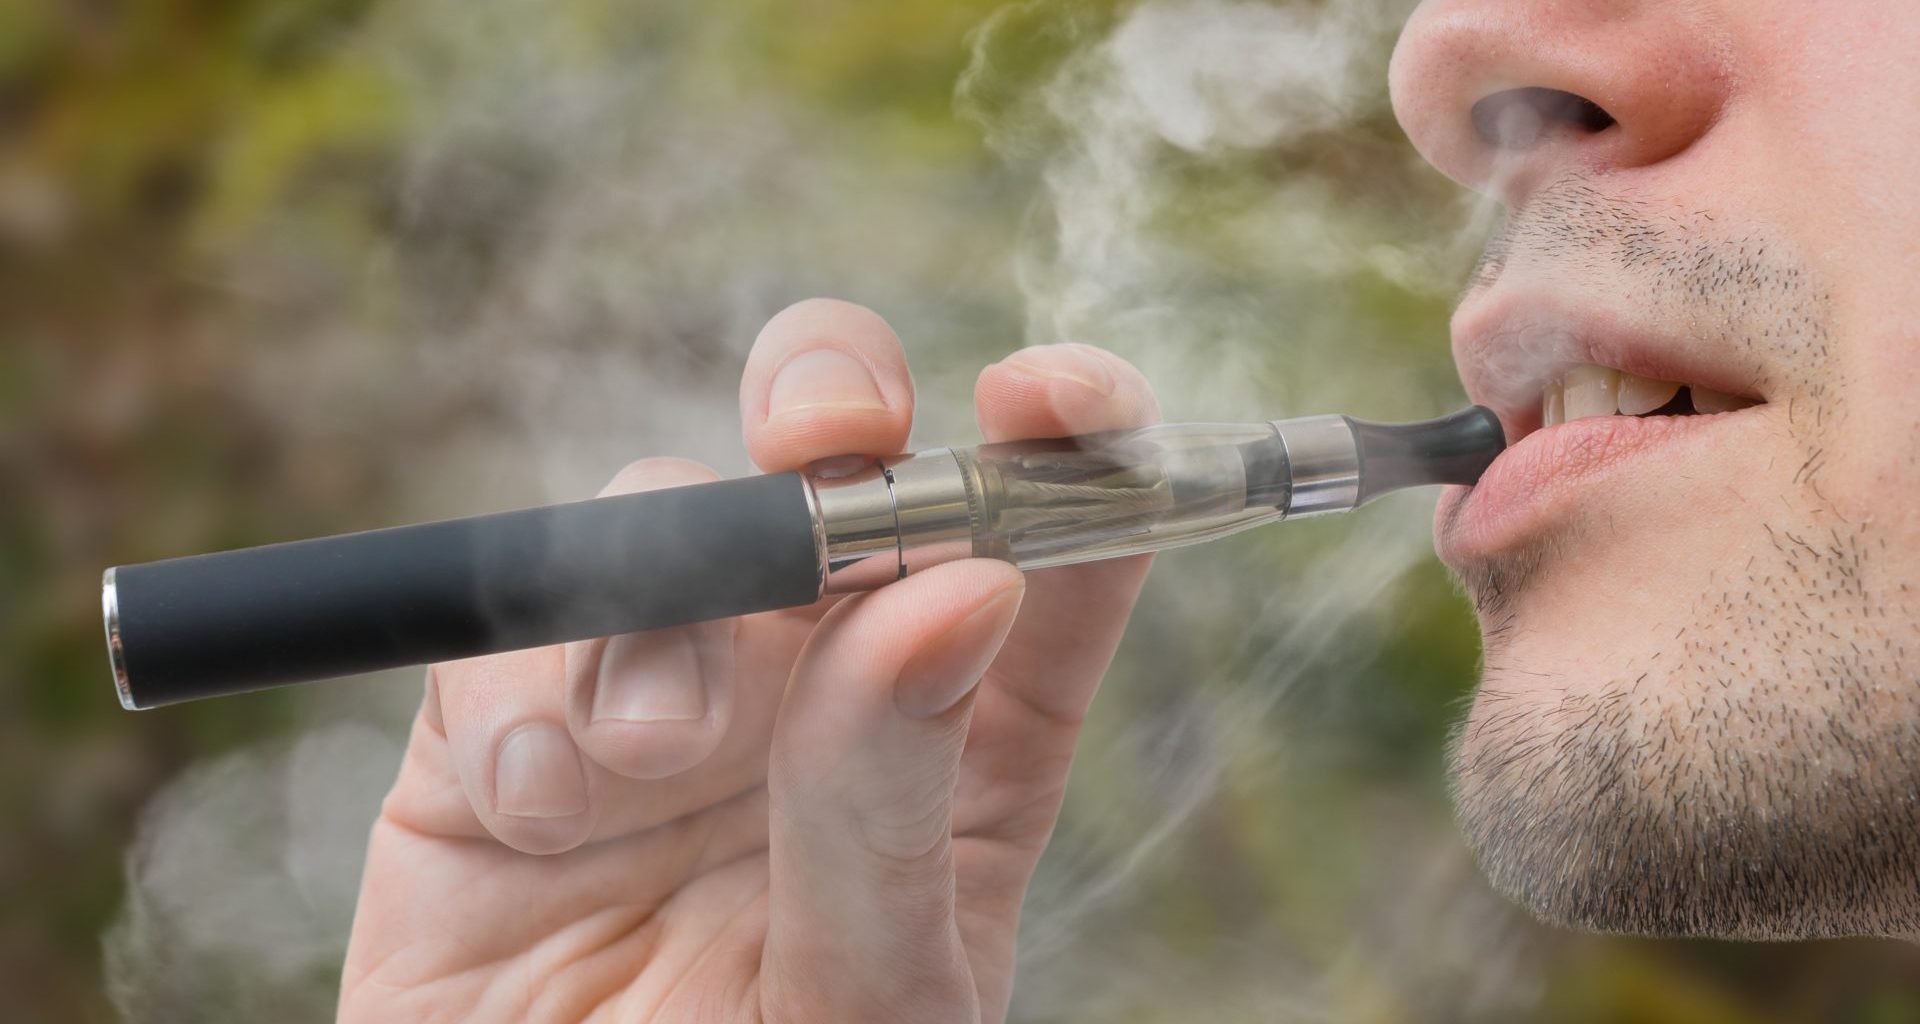 Facebook campaigns opposing anti-vaping laws prompt concern 4